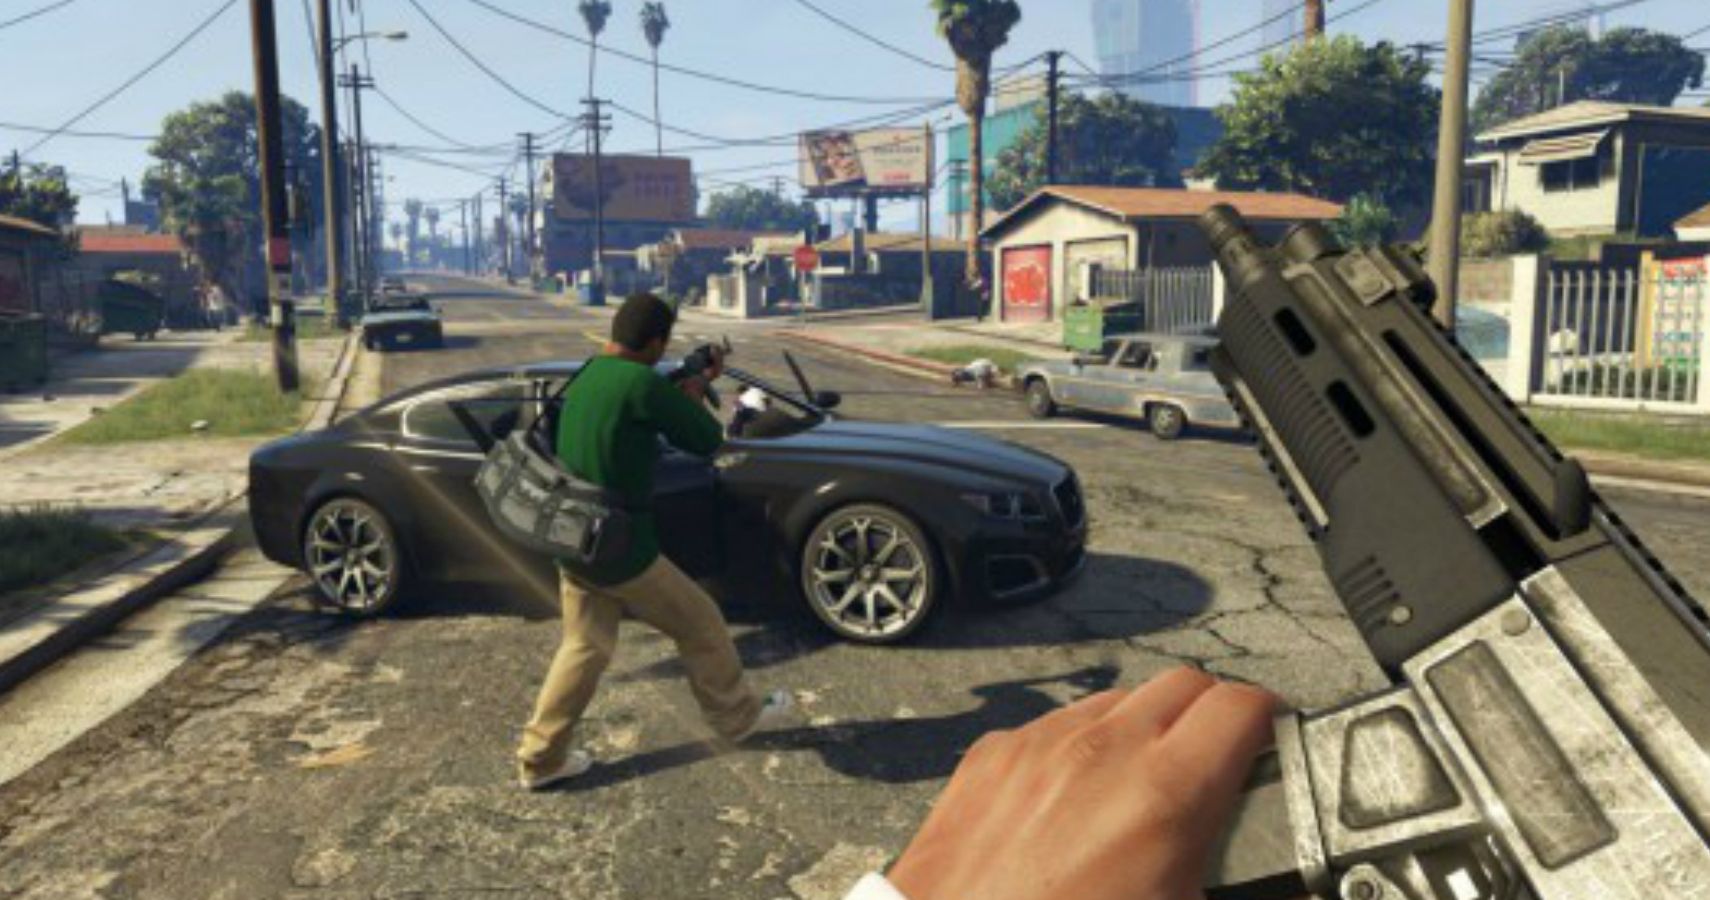 how to get mods in gta 5 on xbox one